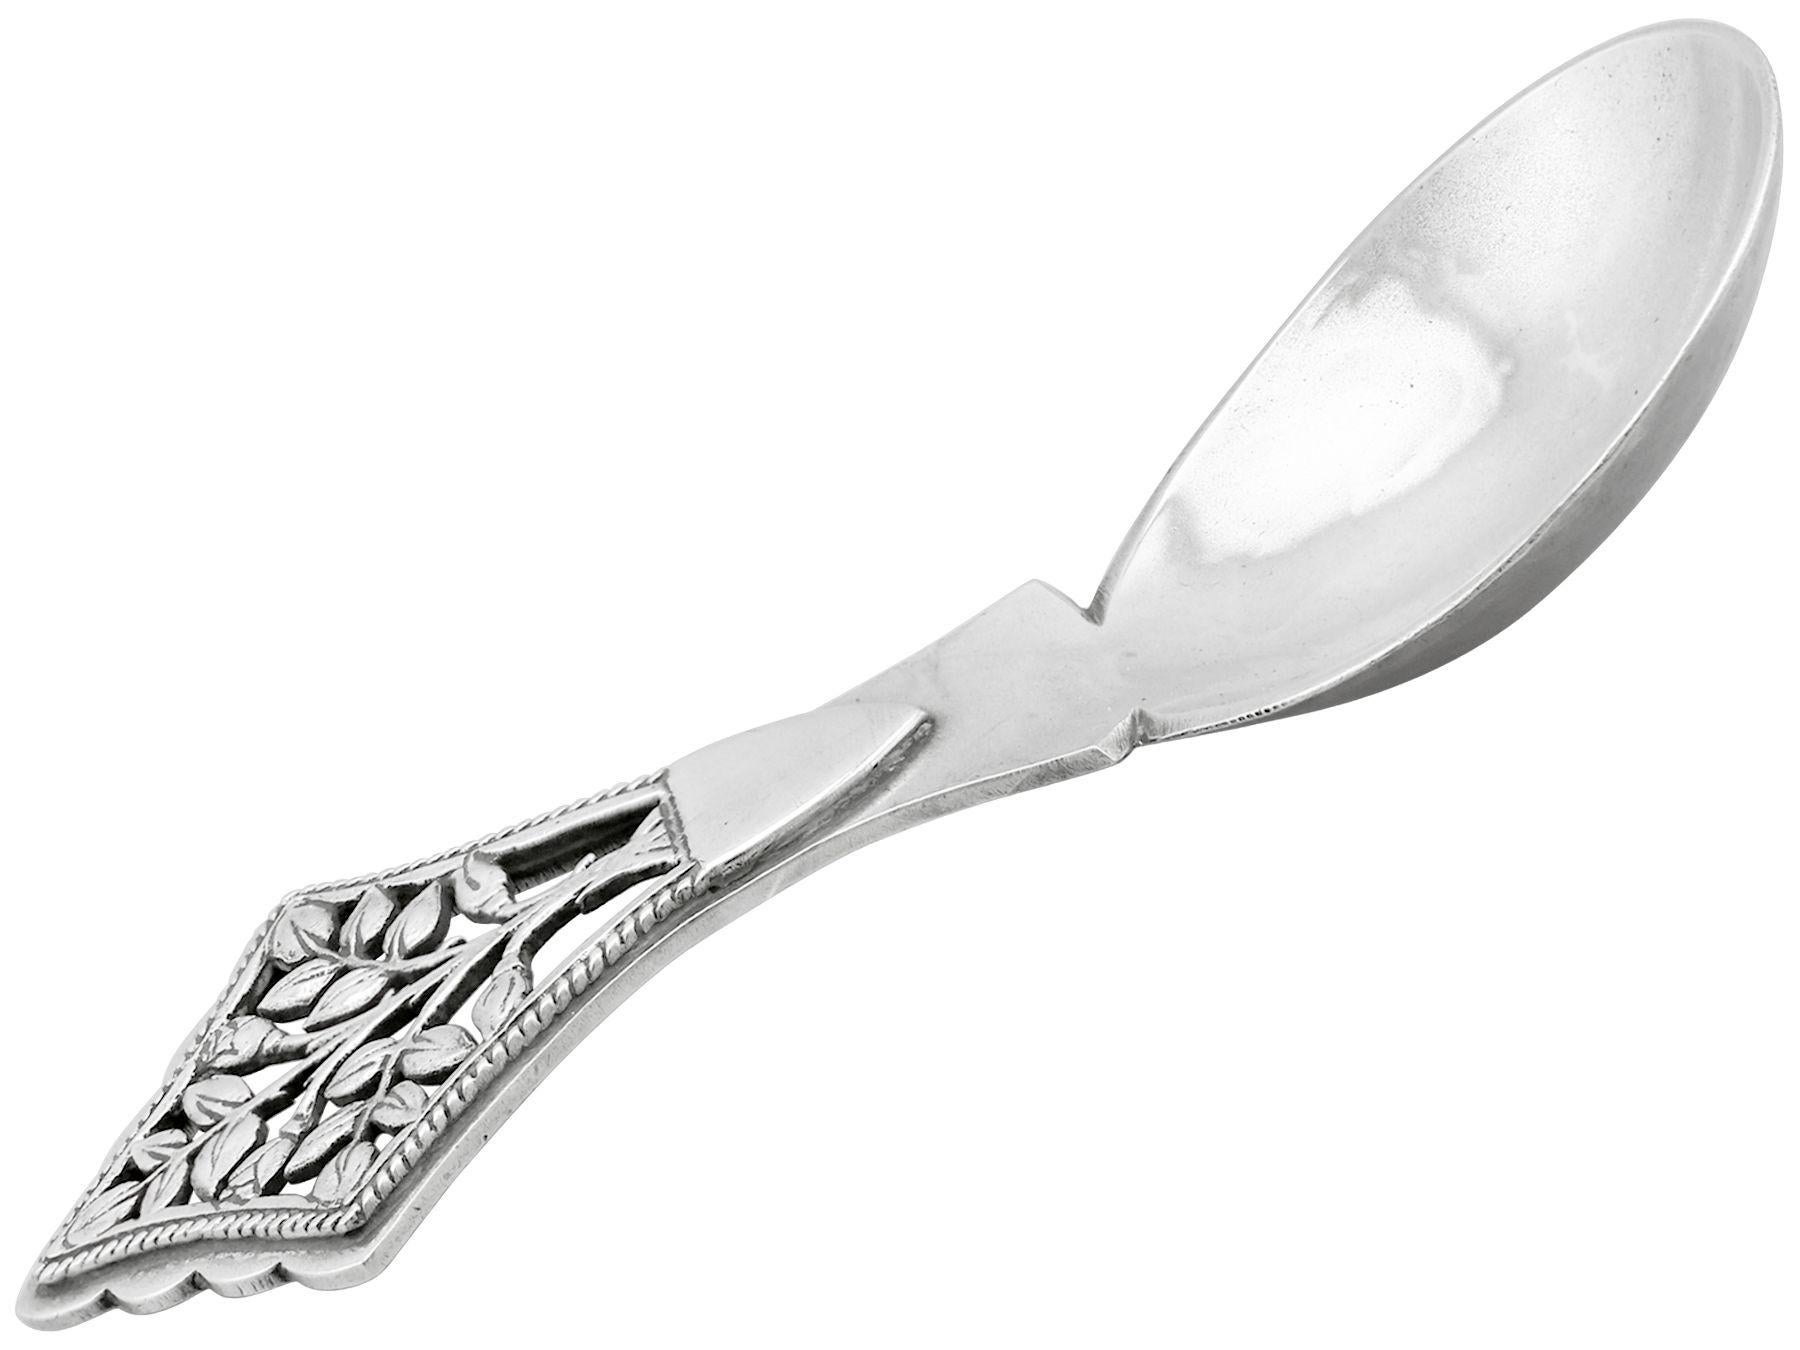 An exceptional, fine and impressive antique George V English sterling silver caddy spoon made by Henry George Murphy; an addition to our teaware collection.

This exceptional antique George V sterling silver caddy spoon has a plain rounded